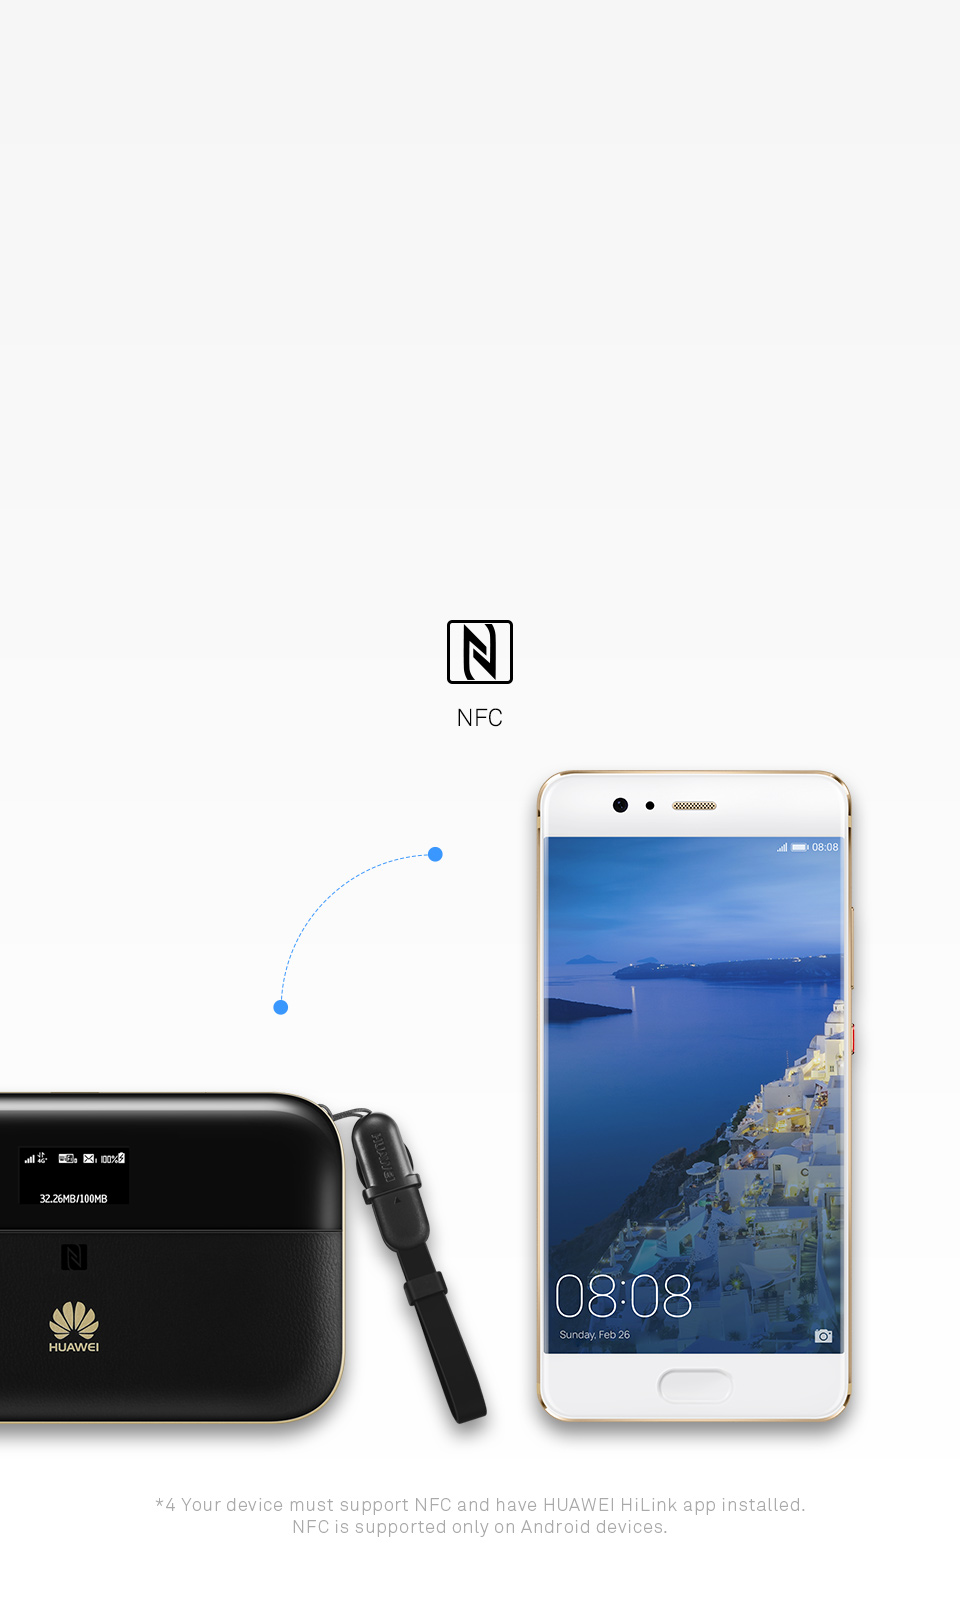 NFC-enabled Wi-Fi connection in just one touch 